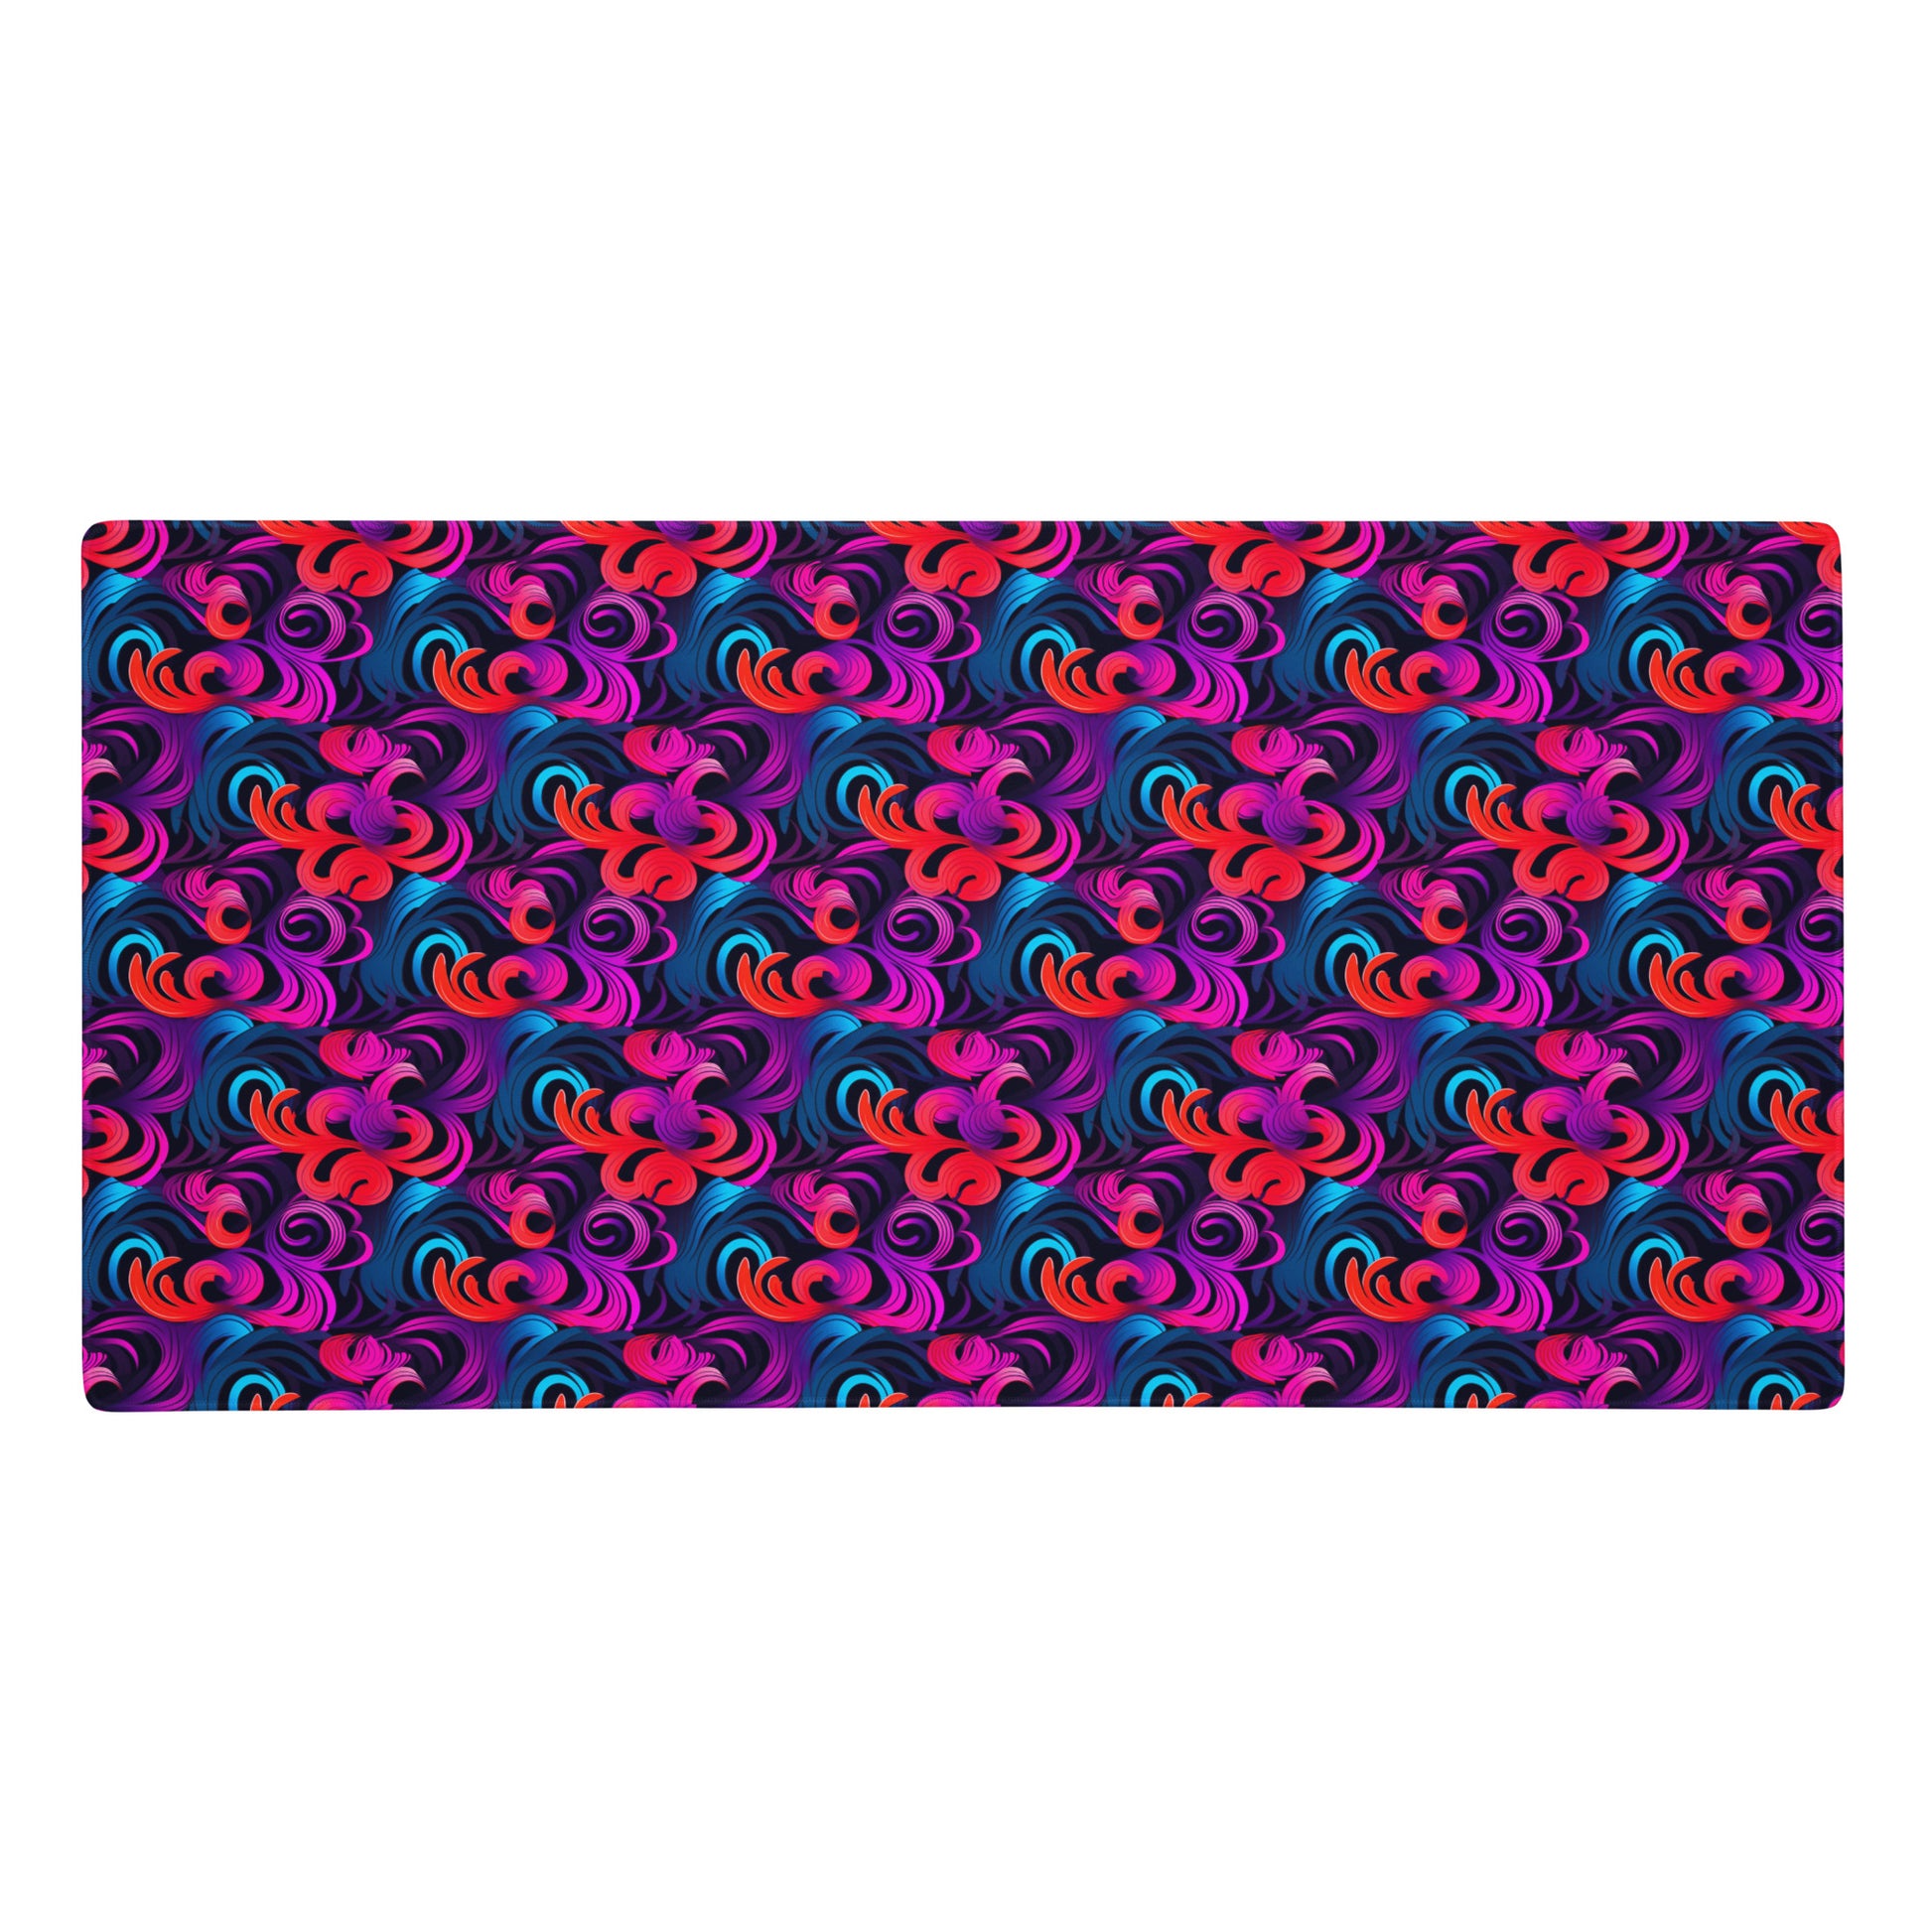 A 36" x 18" desk pad with a bright floral pattern all over it. Blue, Purple and Red in color.